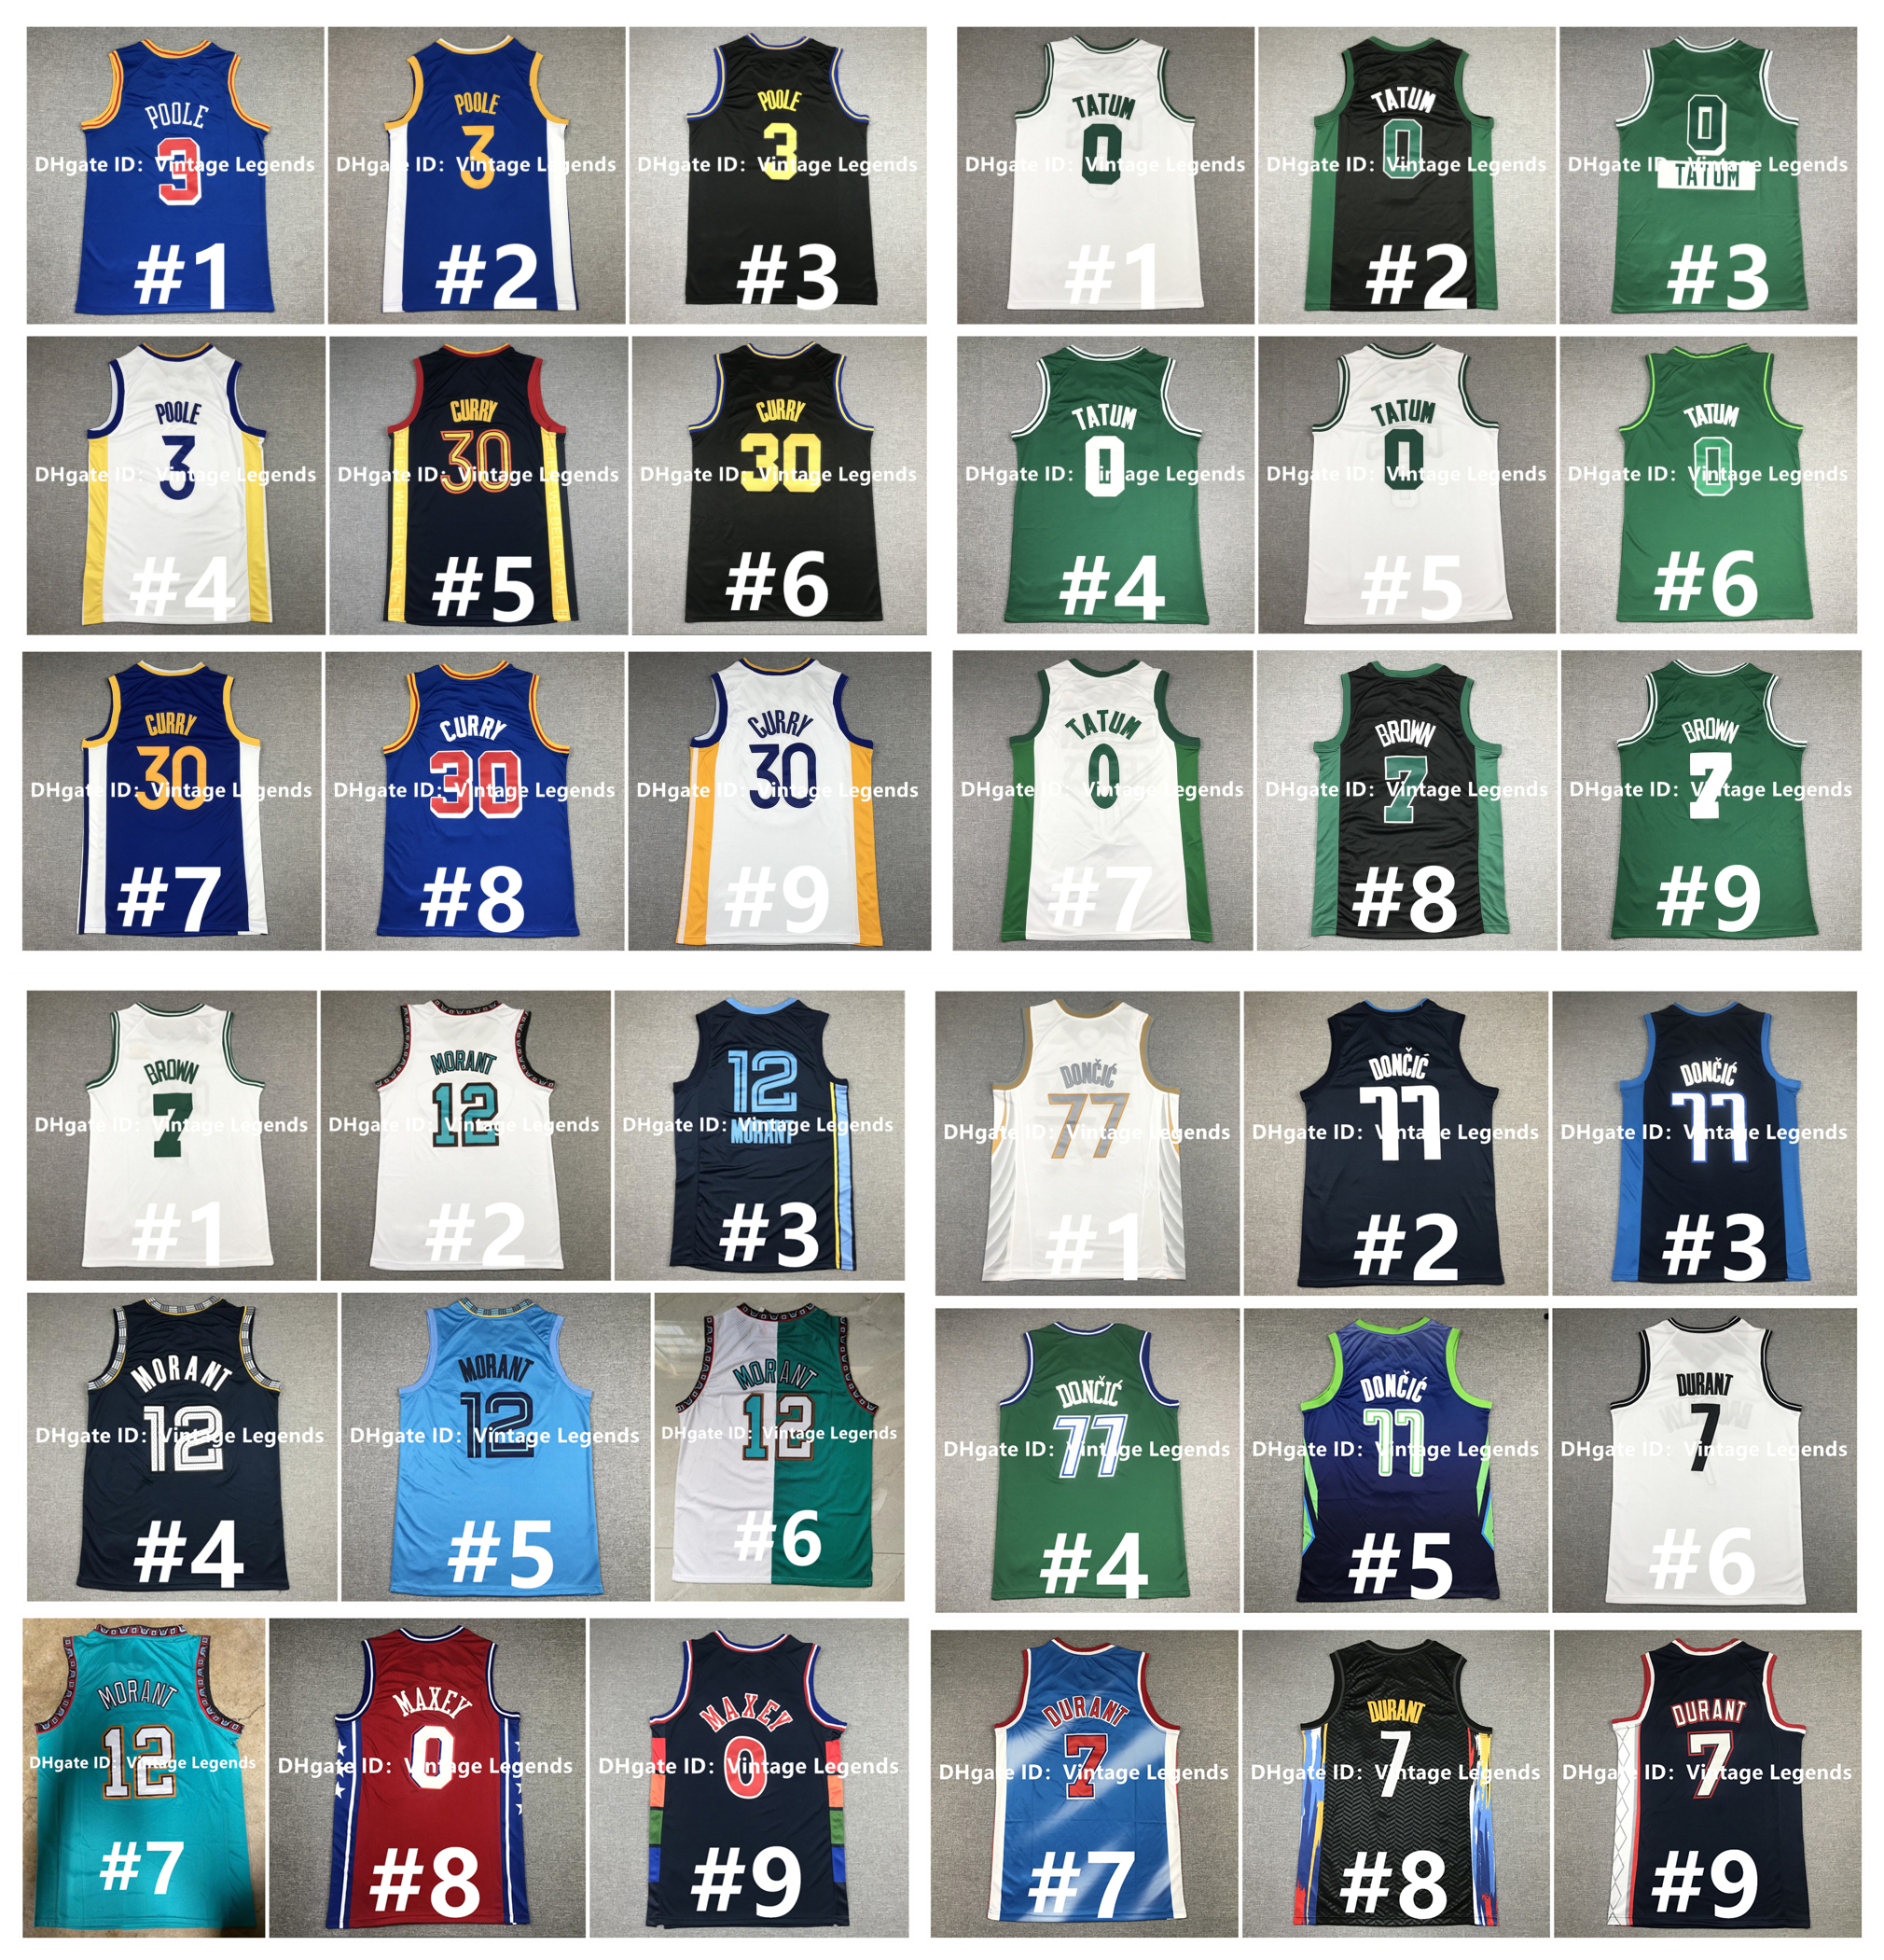 Stephen Curry Basketball Jersey Ja Morant Poole Andrew Wiggins Jayson Tatum Jaylen Brown Tyrese Maxey Joel Embiid Luka Doncic Kevin Durant Cade Cunningham Butler